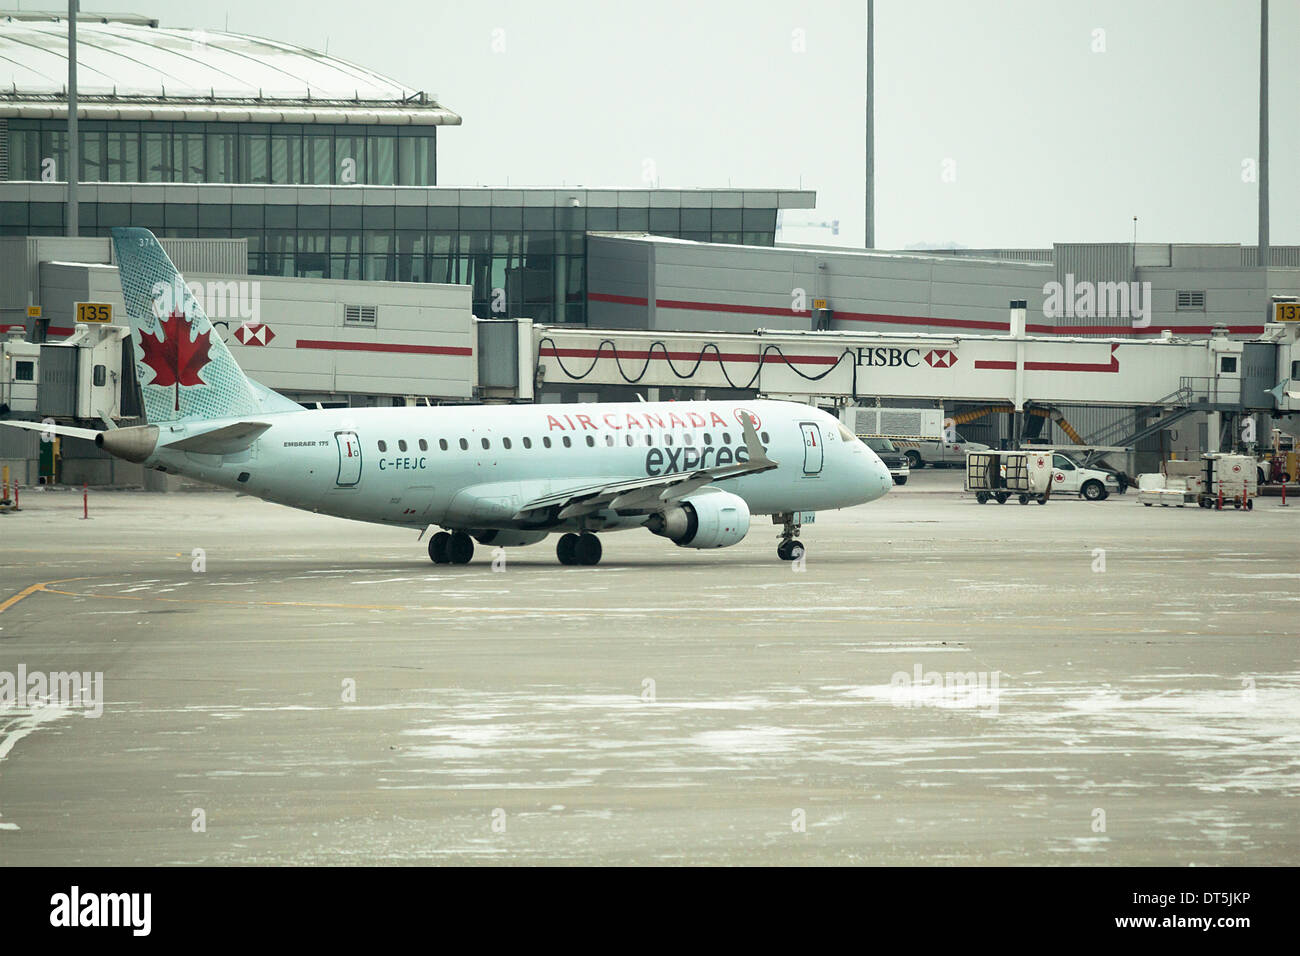 Air Canada Express Embraer 175 Jet on tarmac at Pearson International Airport Stock Photo